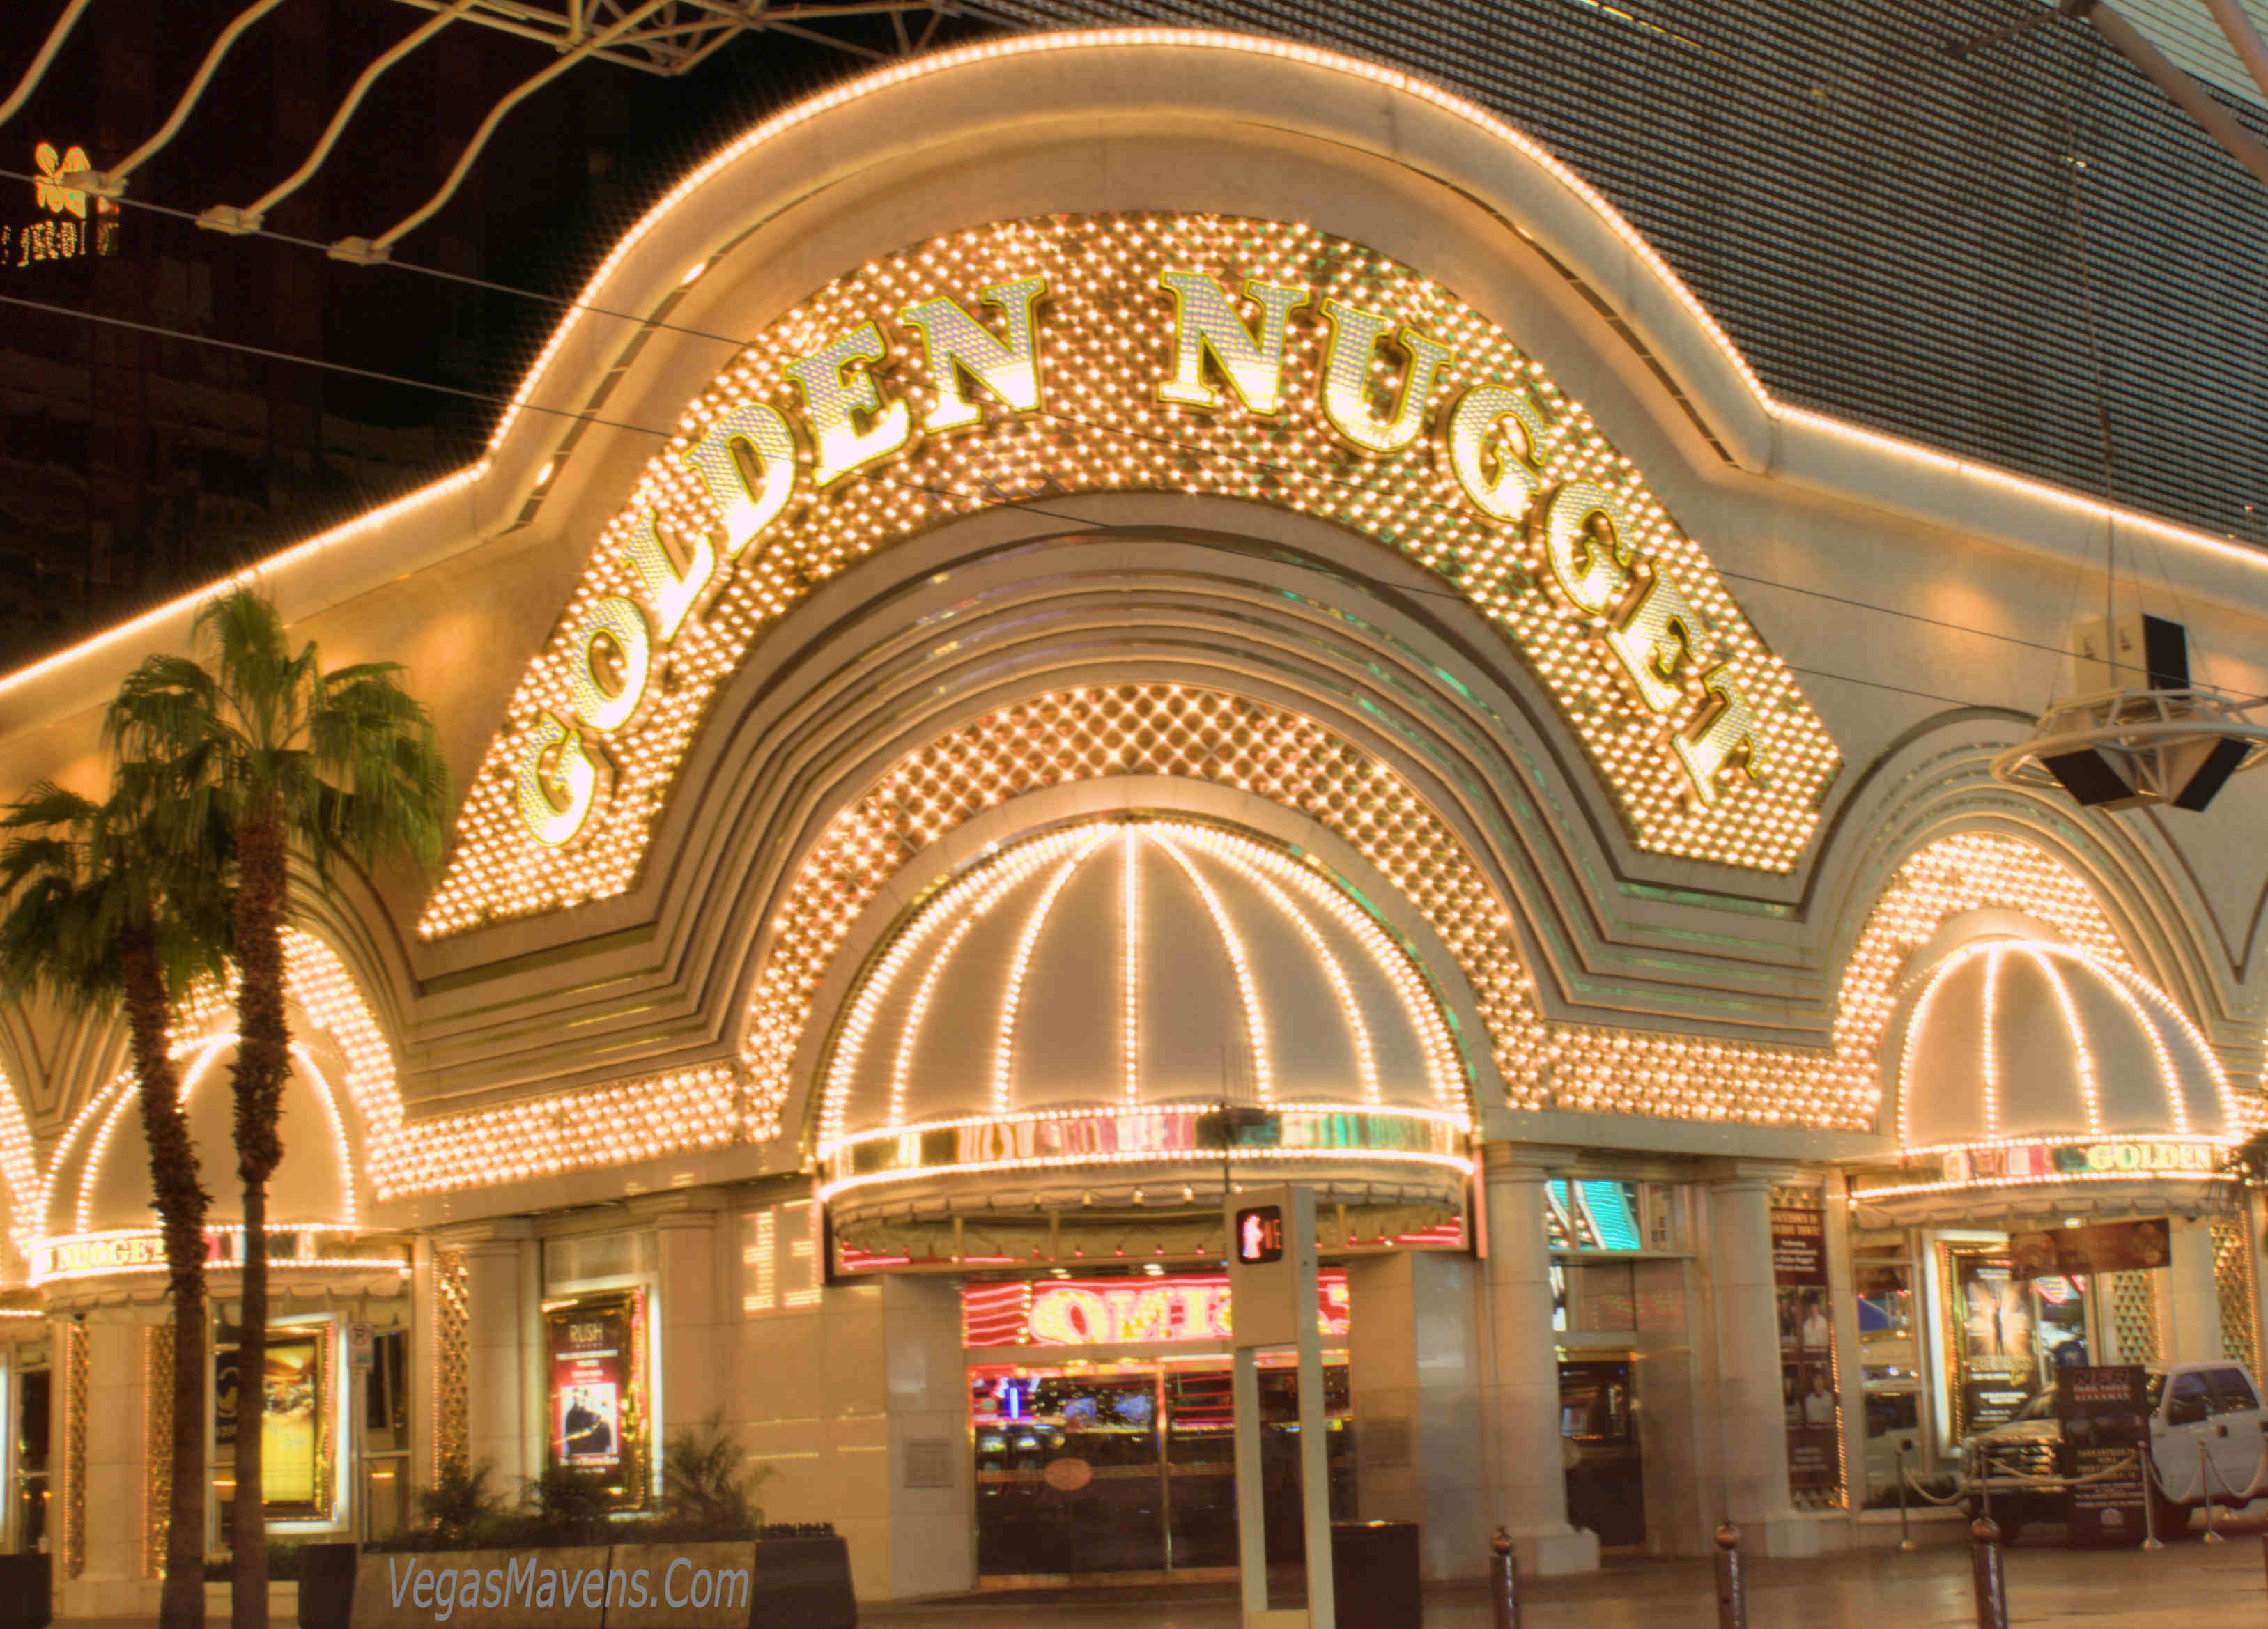 play casino online for free golden nugget